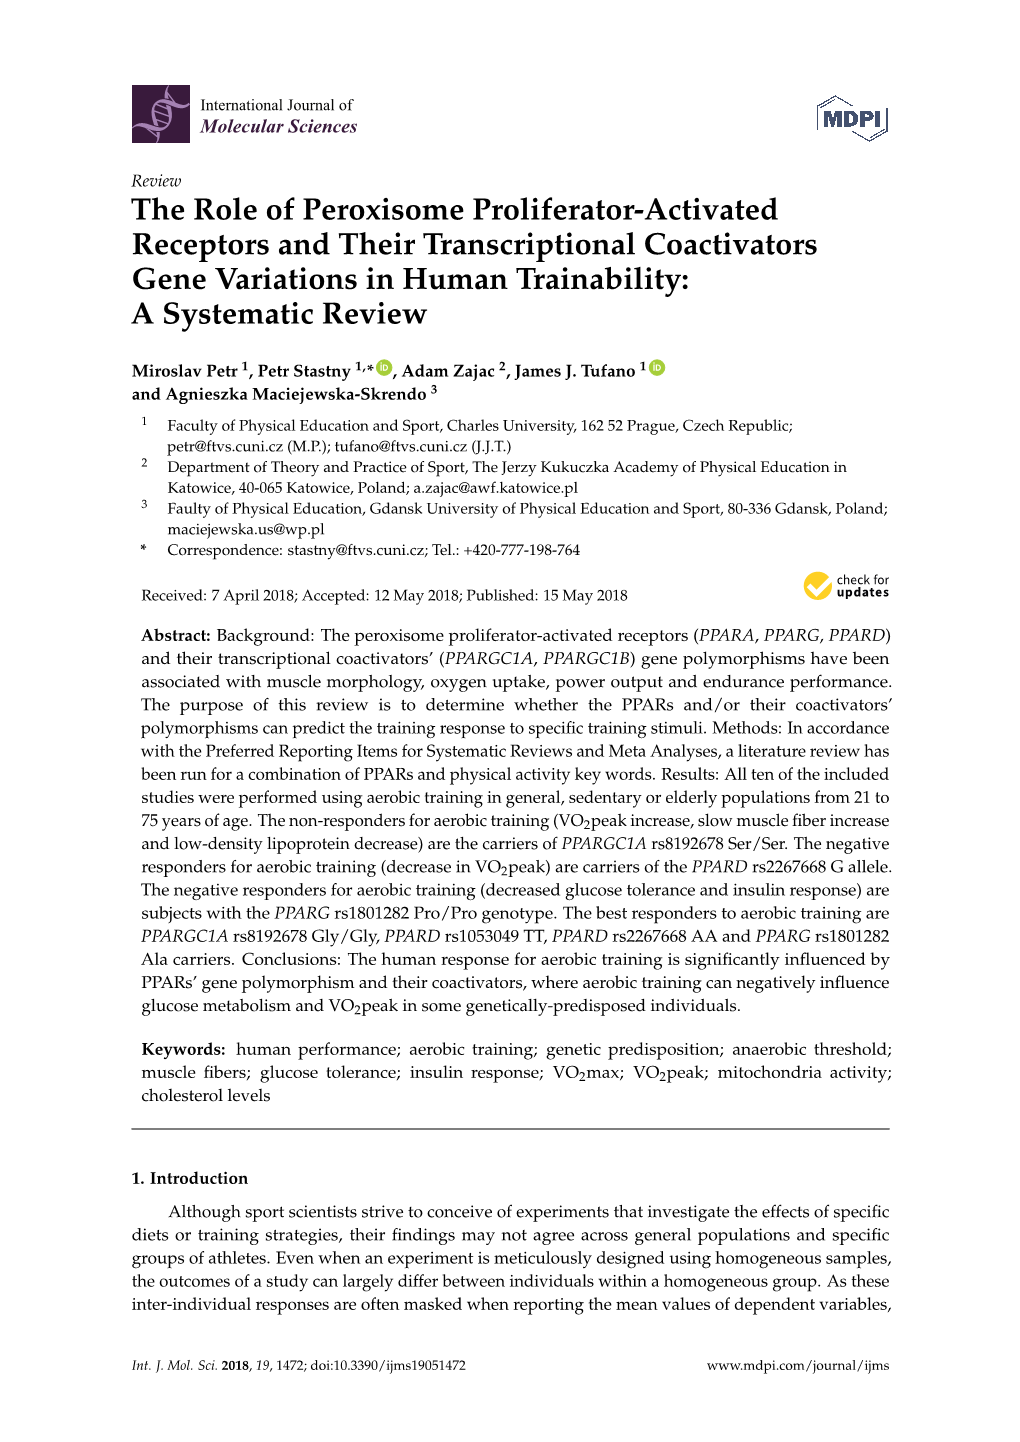 The Role of Peroxisome Proliferator-Activated Receptors and Their Transcriptional Coactivators Gene Variations in Human Trainability: a Systematic Review